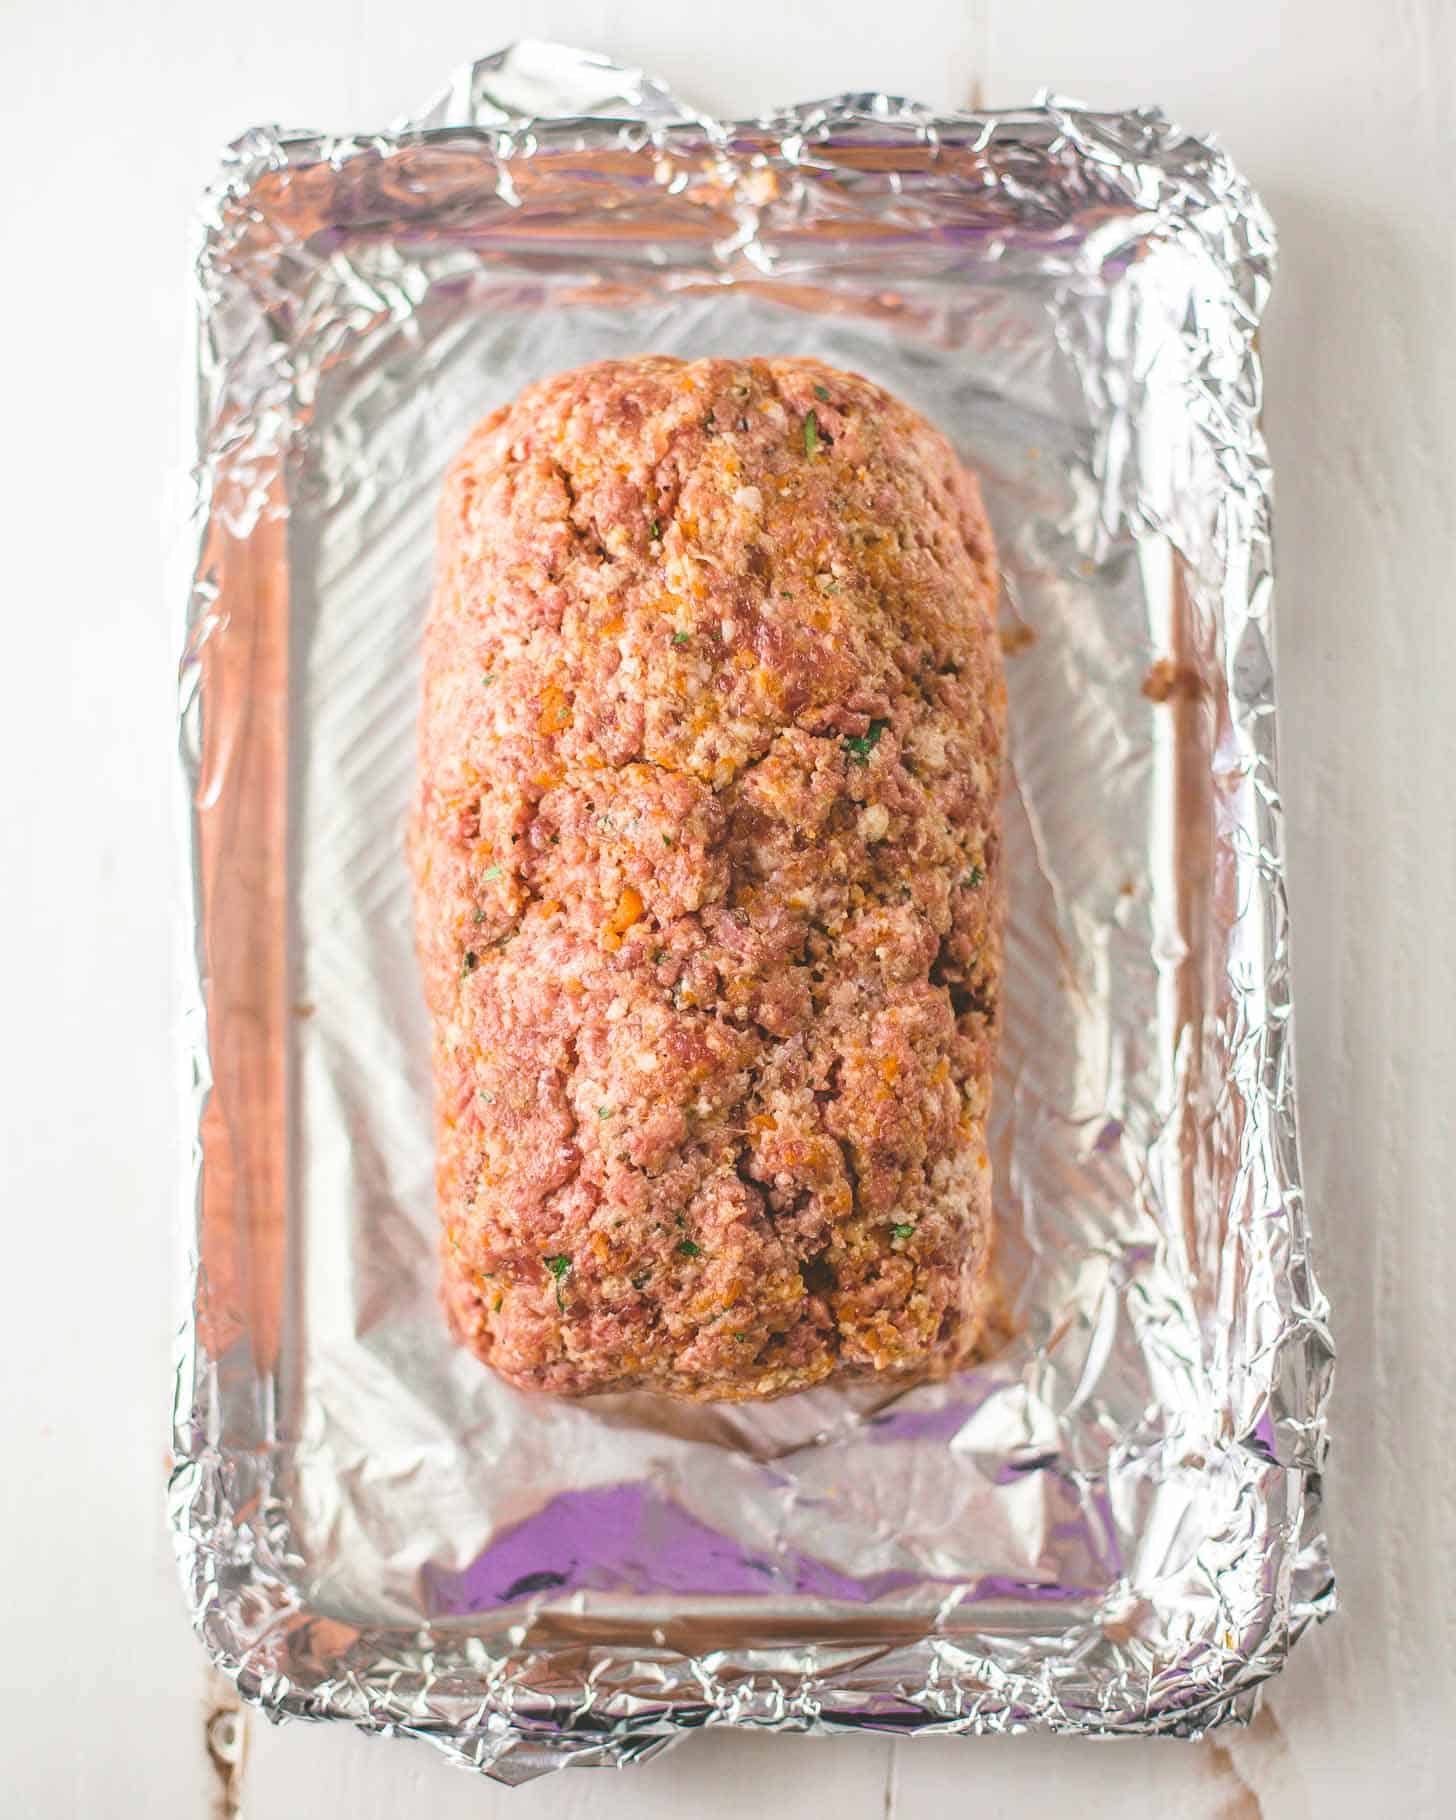 uncooked meatloaf on a foil lined sheet pan